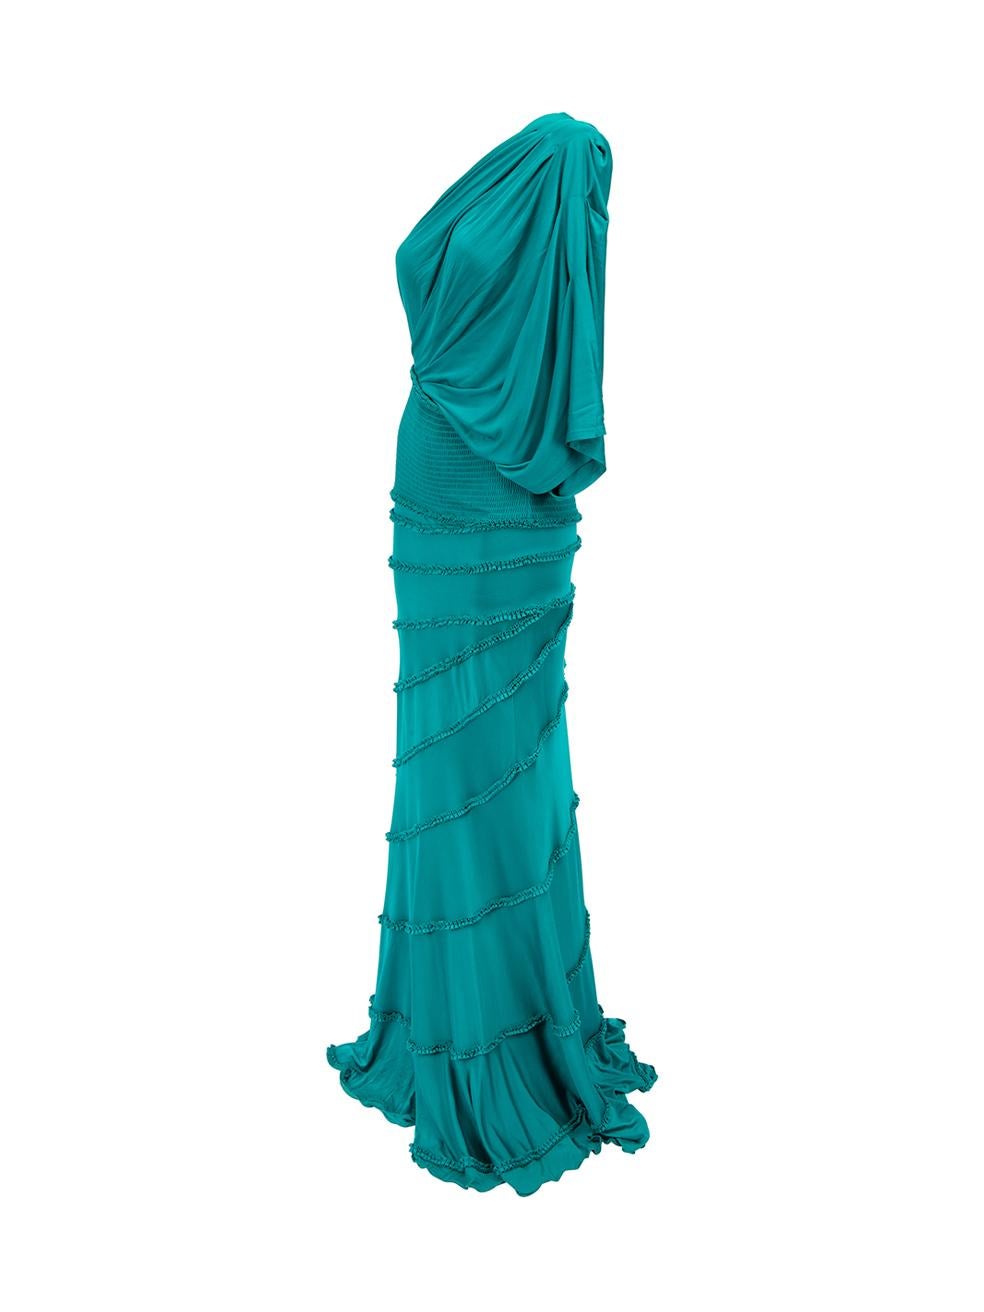 Turquoise One Shoulder Ruffle Detail Maxi Dress Size M In Good Condition For Sale In London, GB